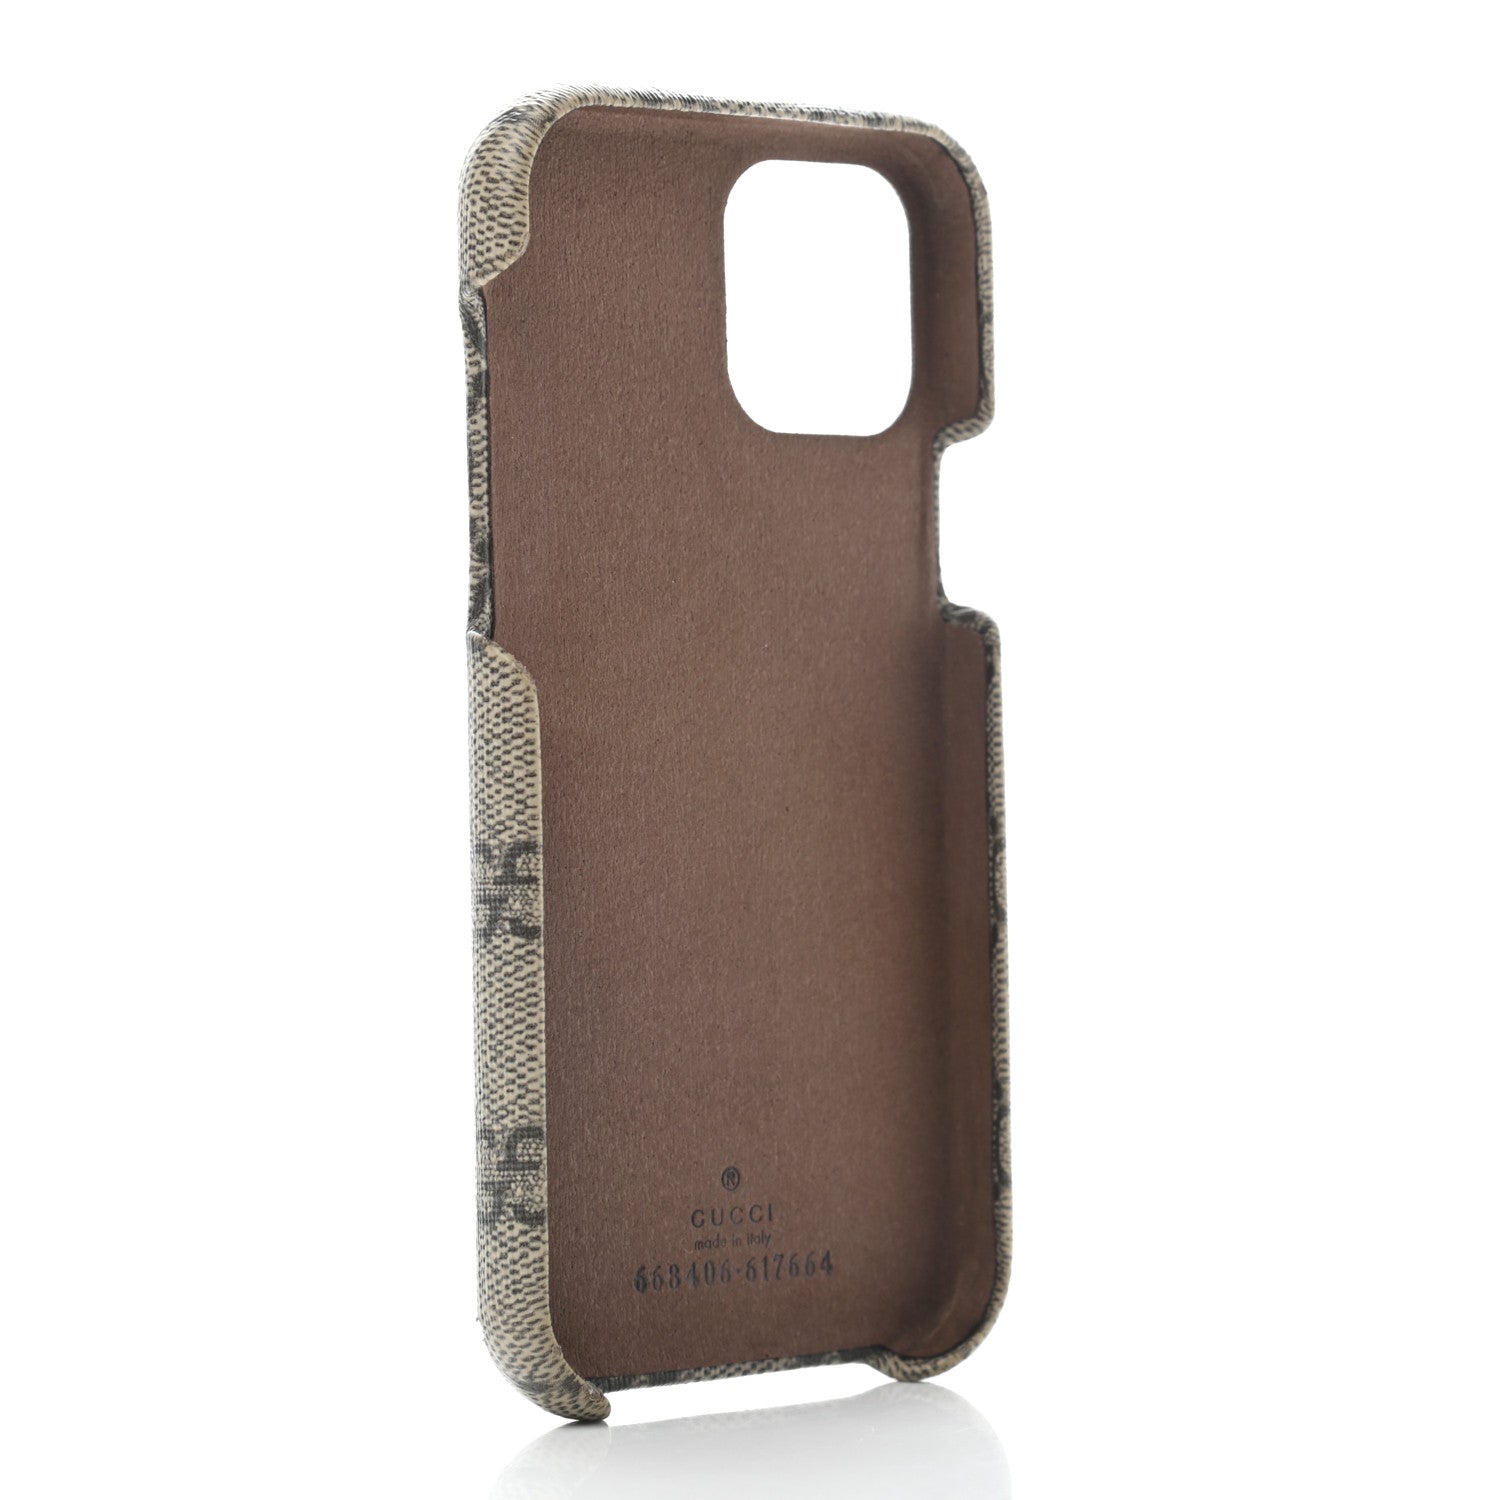 Ophidia case for iPhone 13 Pro Max in beige and ebony GG Supreme